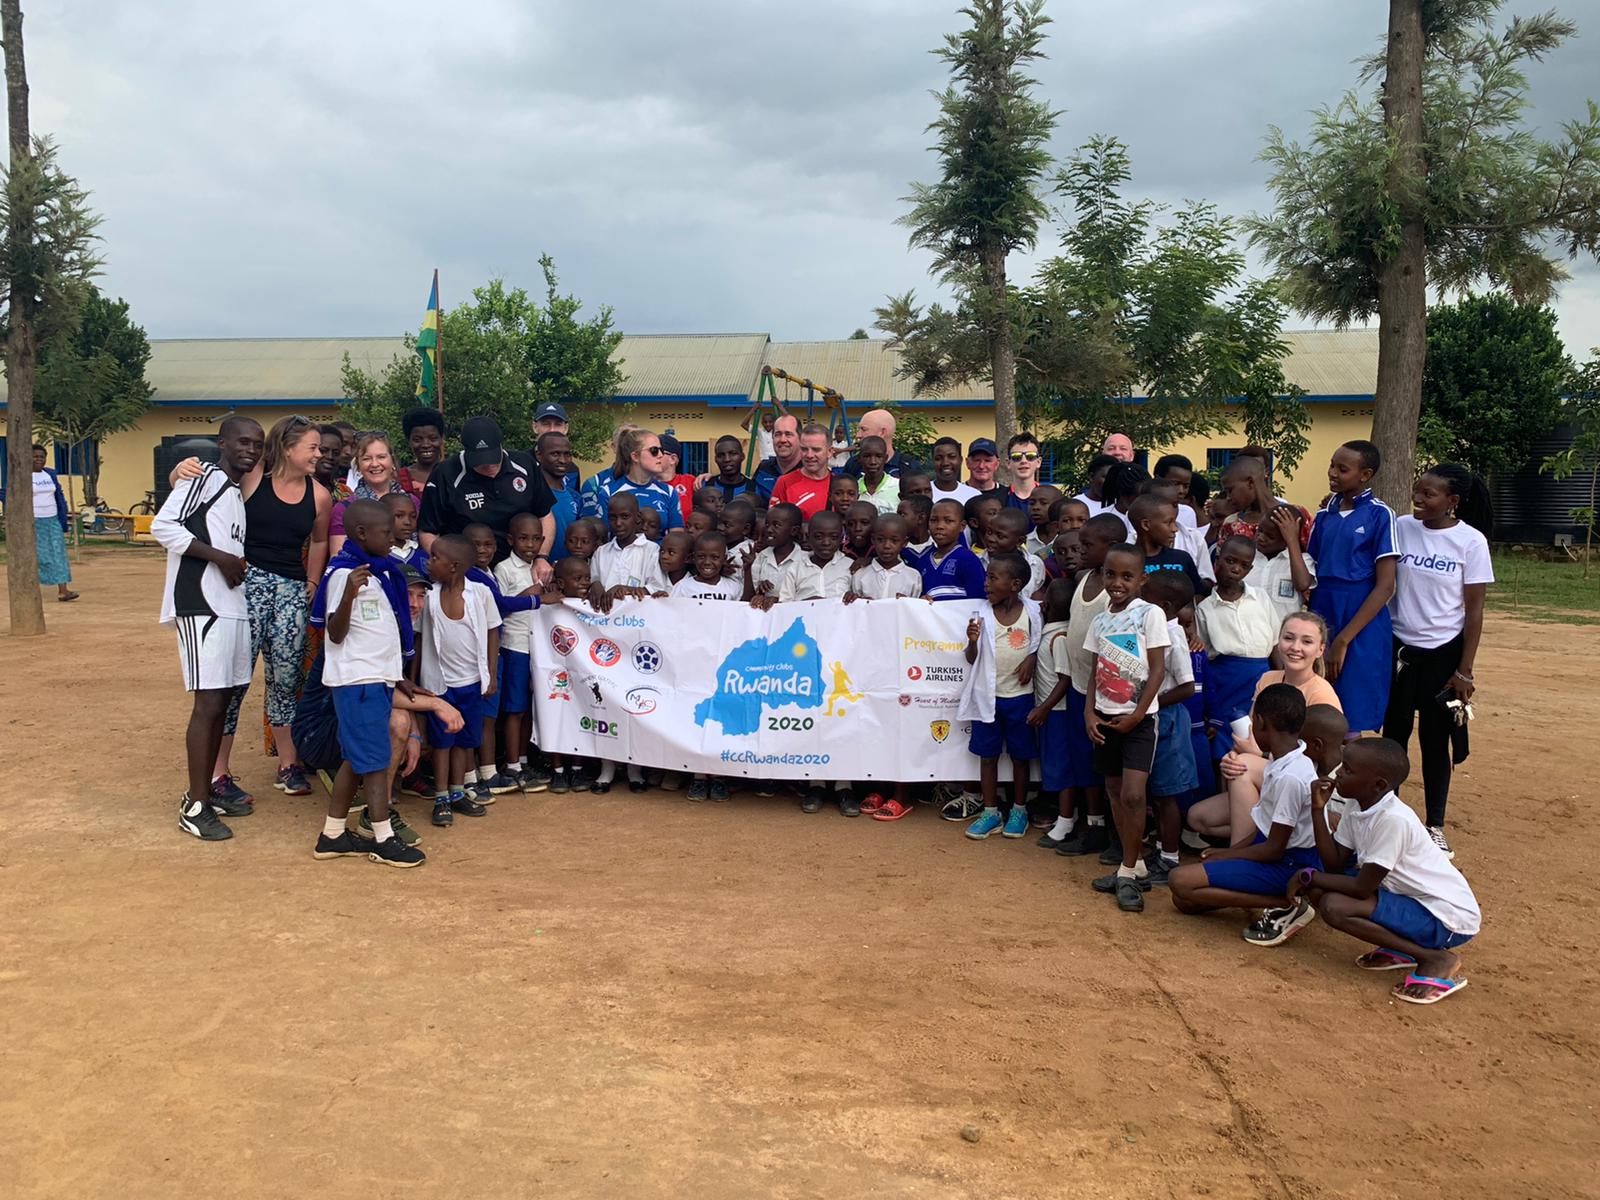 Cruden Homes’ site manager uses football to help build brighter future in Rwanda